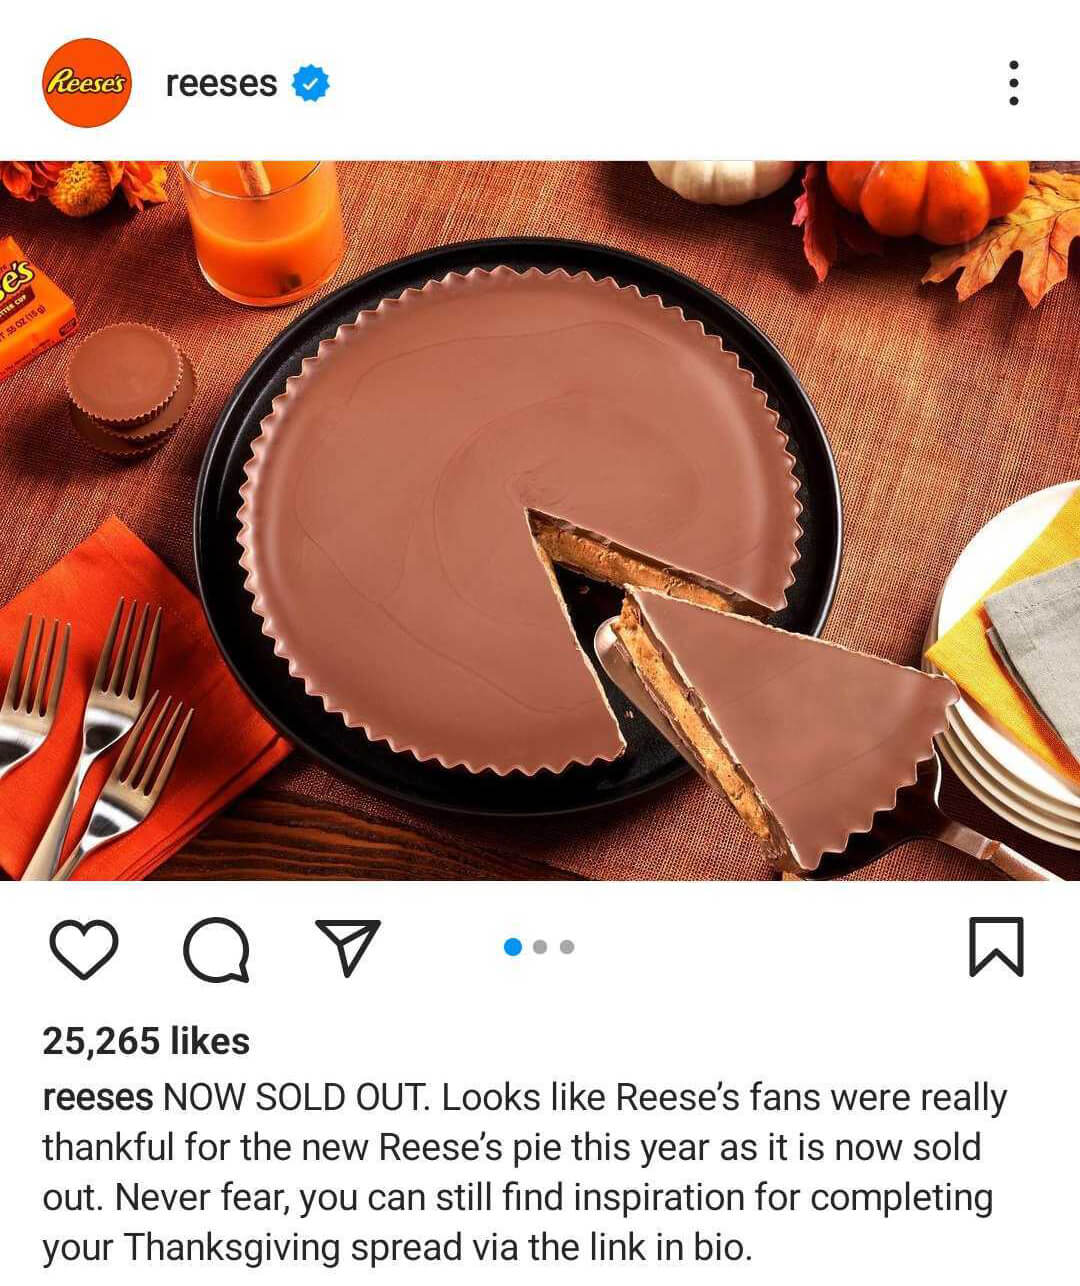 social-media-marketing-guide-holiday-campaigns-2022-elements-strategy-reeses-example-3